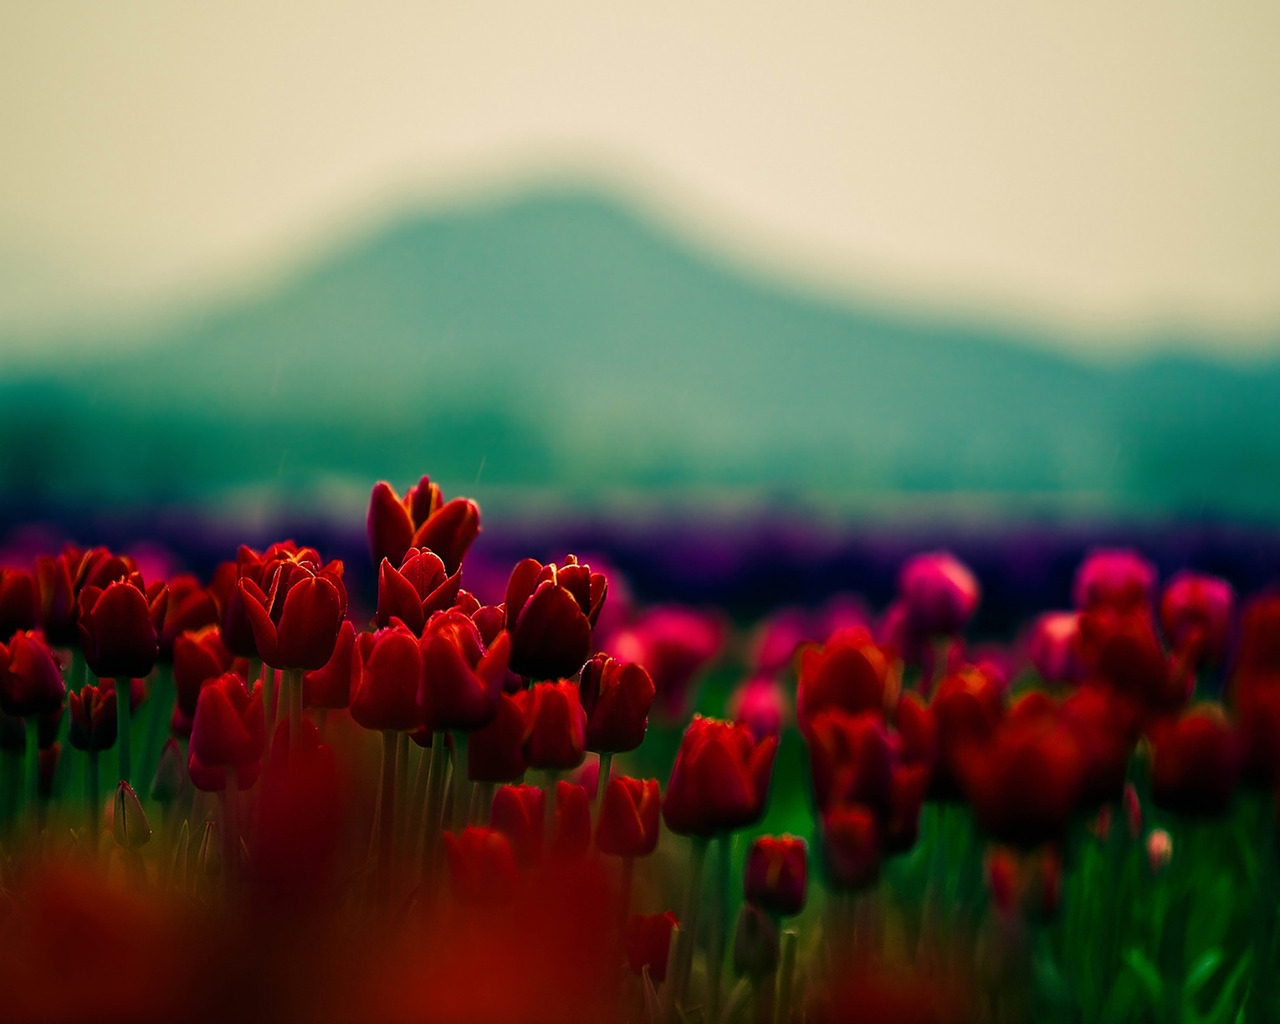 Gorgeous Red Tulips for 1280 x 1024 resolution